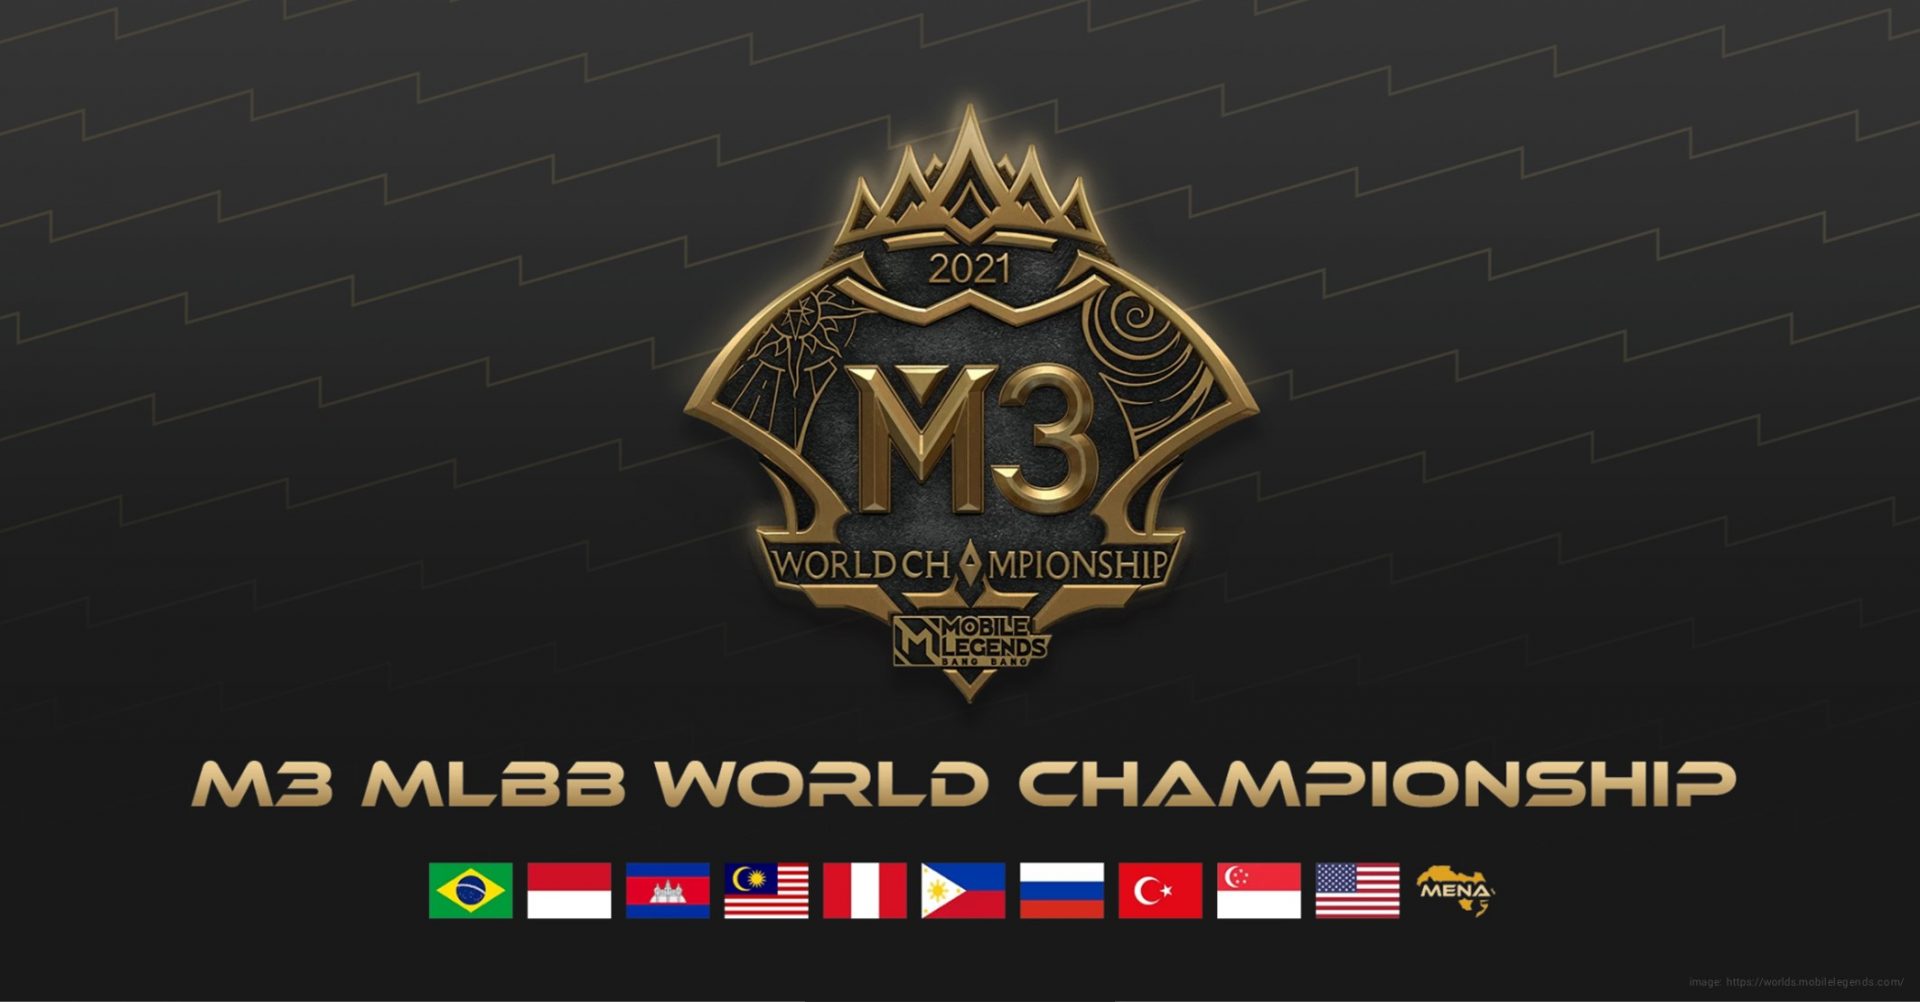 The Mobile Legends: Bang Bang World Championship (M3) Returns to Singapore in December 2021